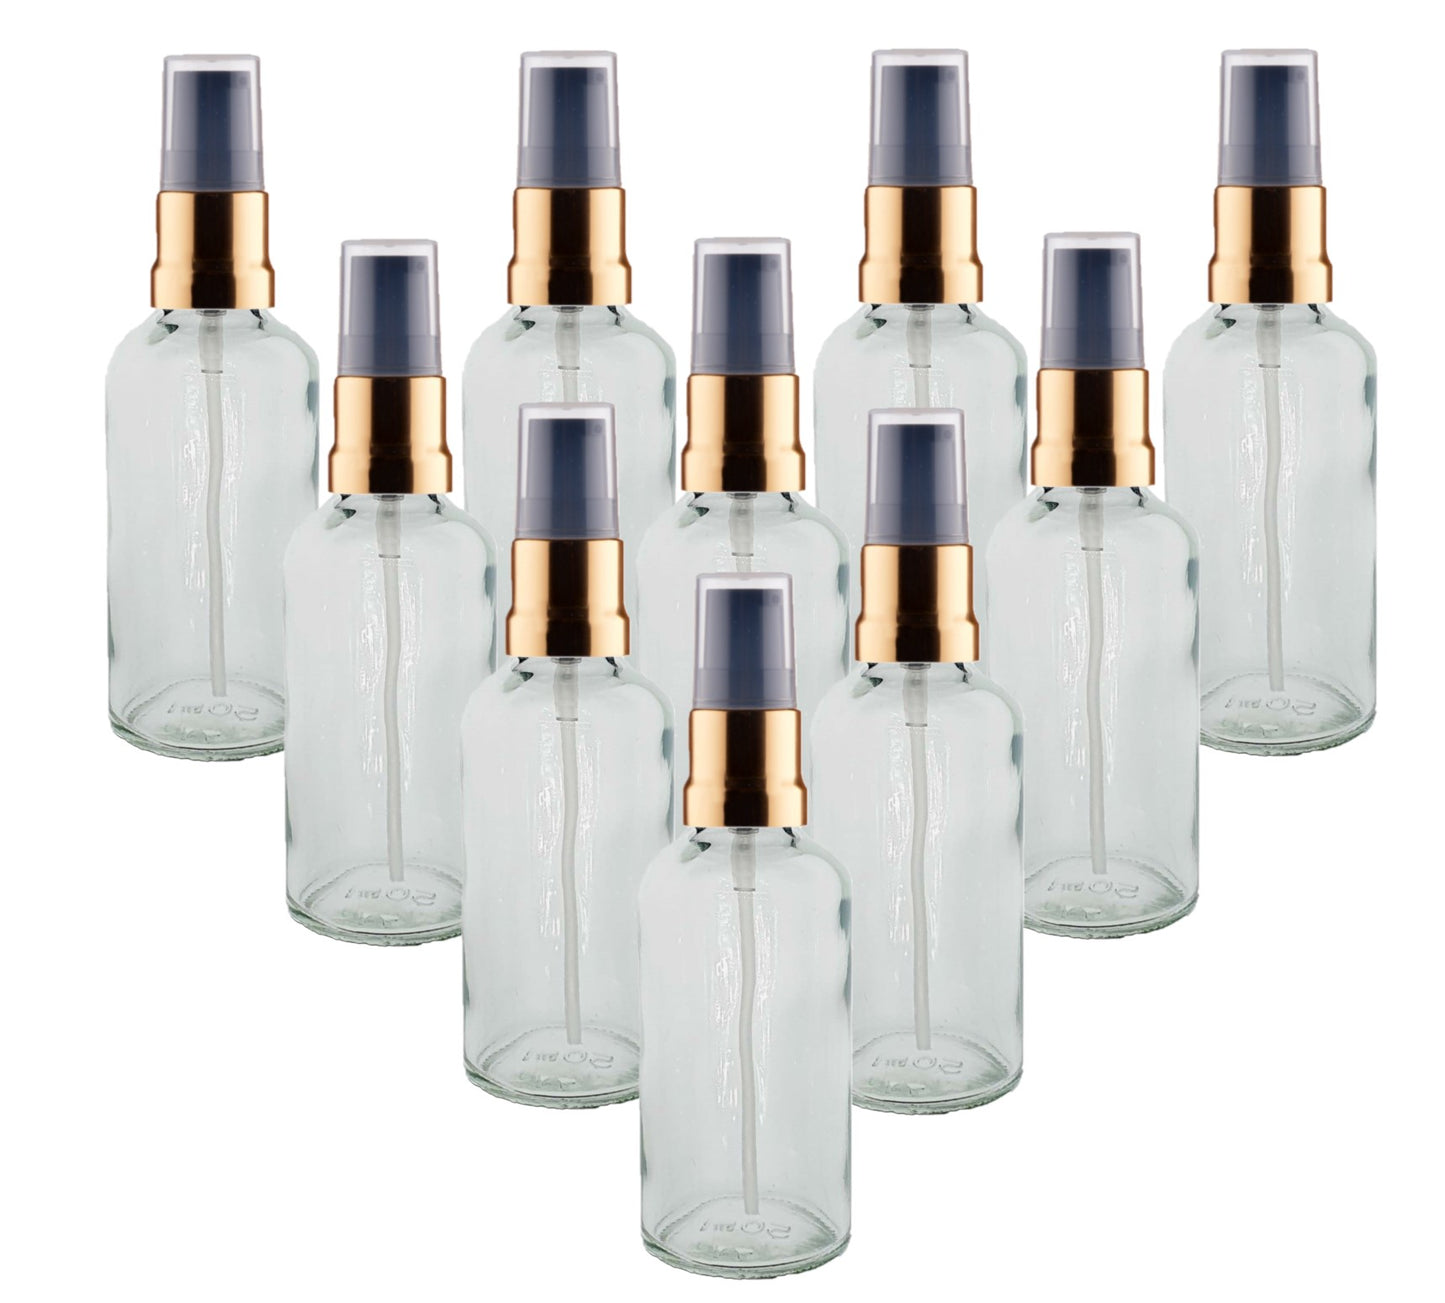 50ml Clear Glass Bottles with Gold/Black Treatment Pump and Clear Overcap